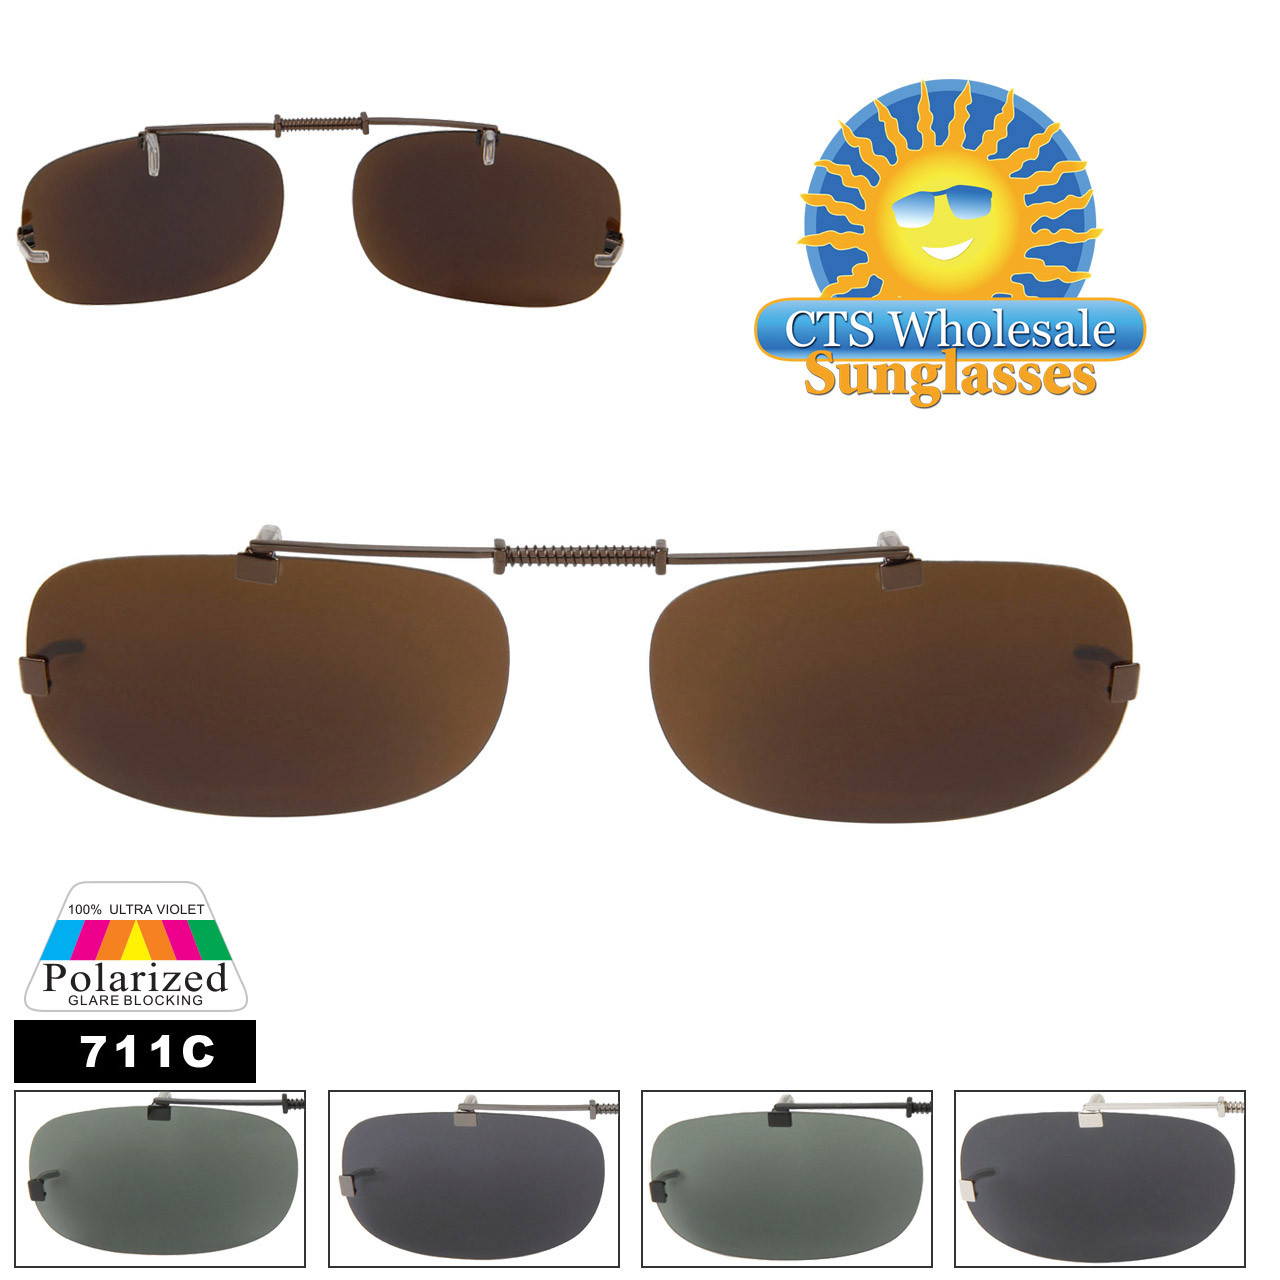 Clip On Sunglasses Wholesale with Polarized Lens 707